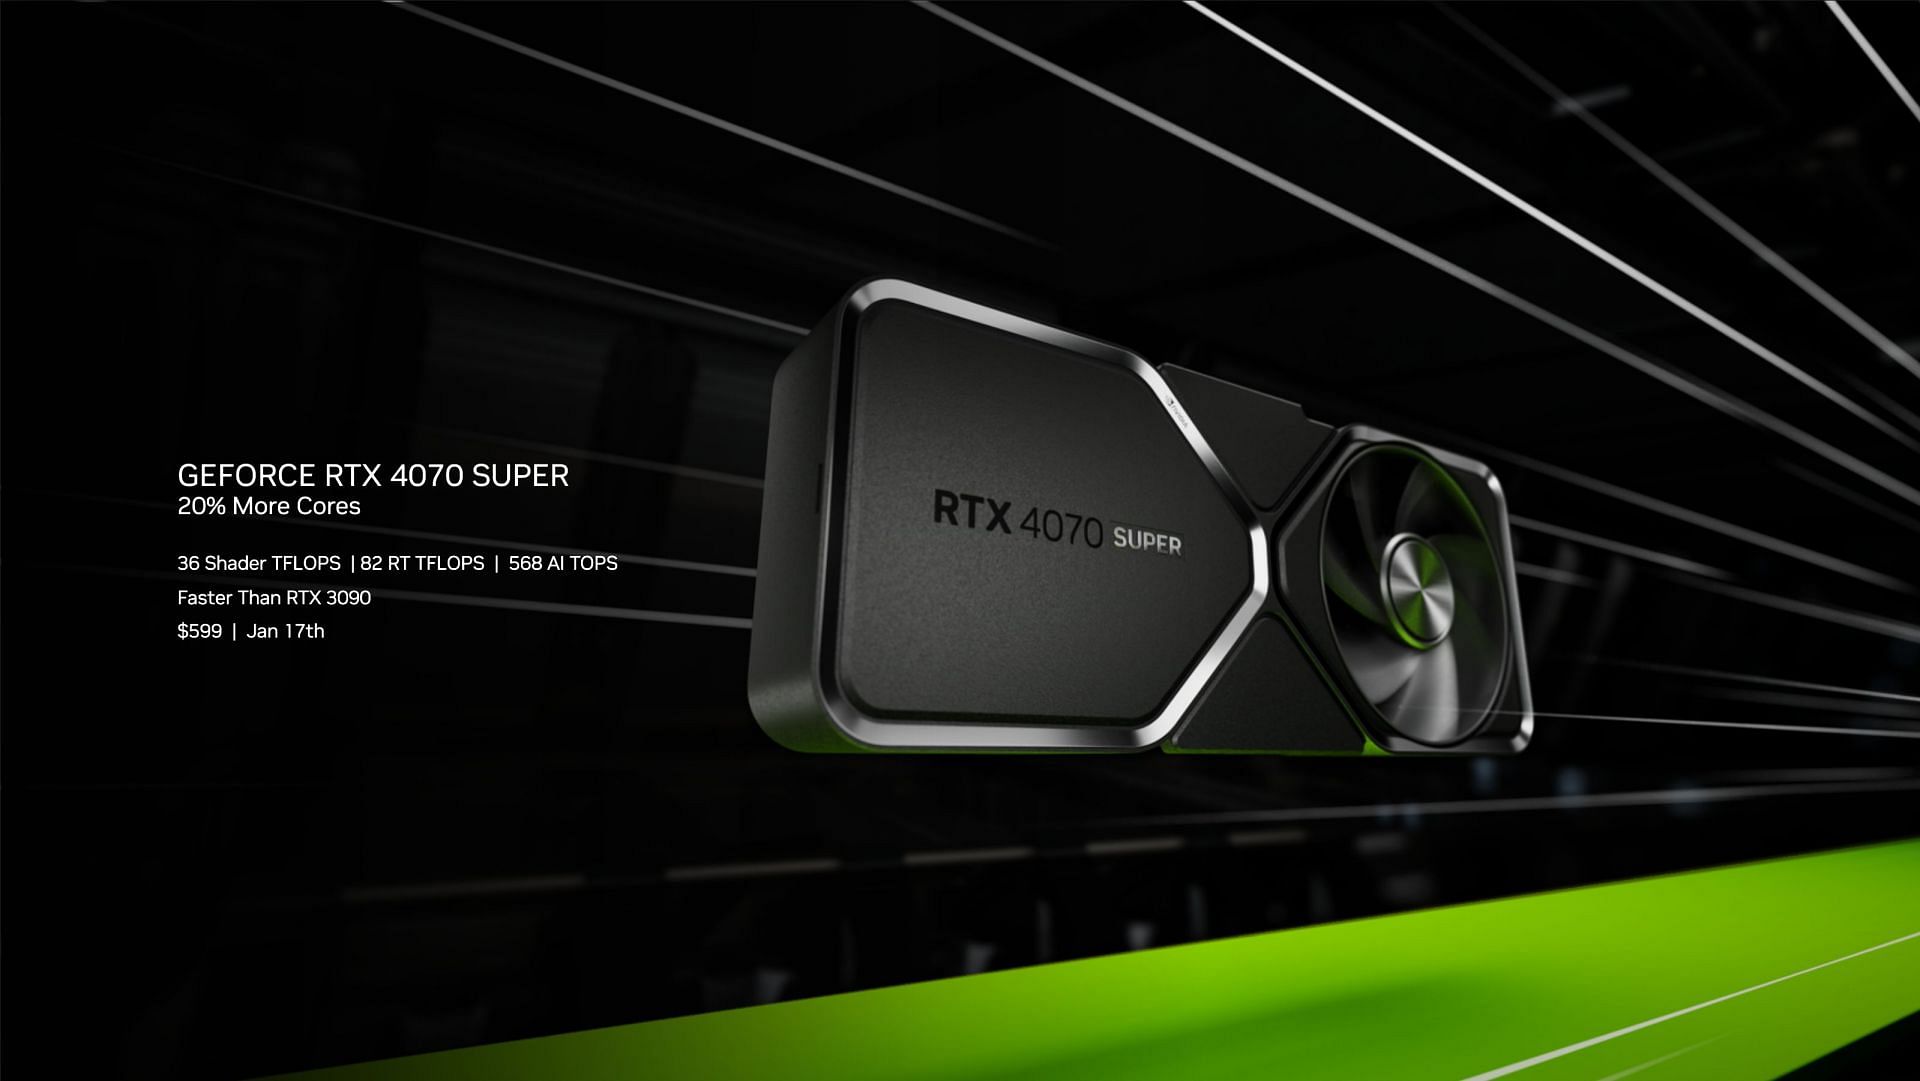 The RTX 4070 Super is priced competitively at $599 (Image via Nvidia)